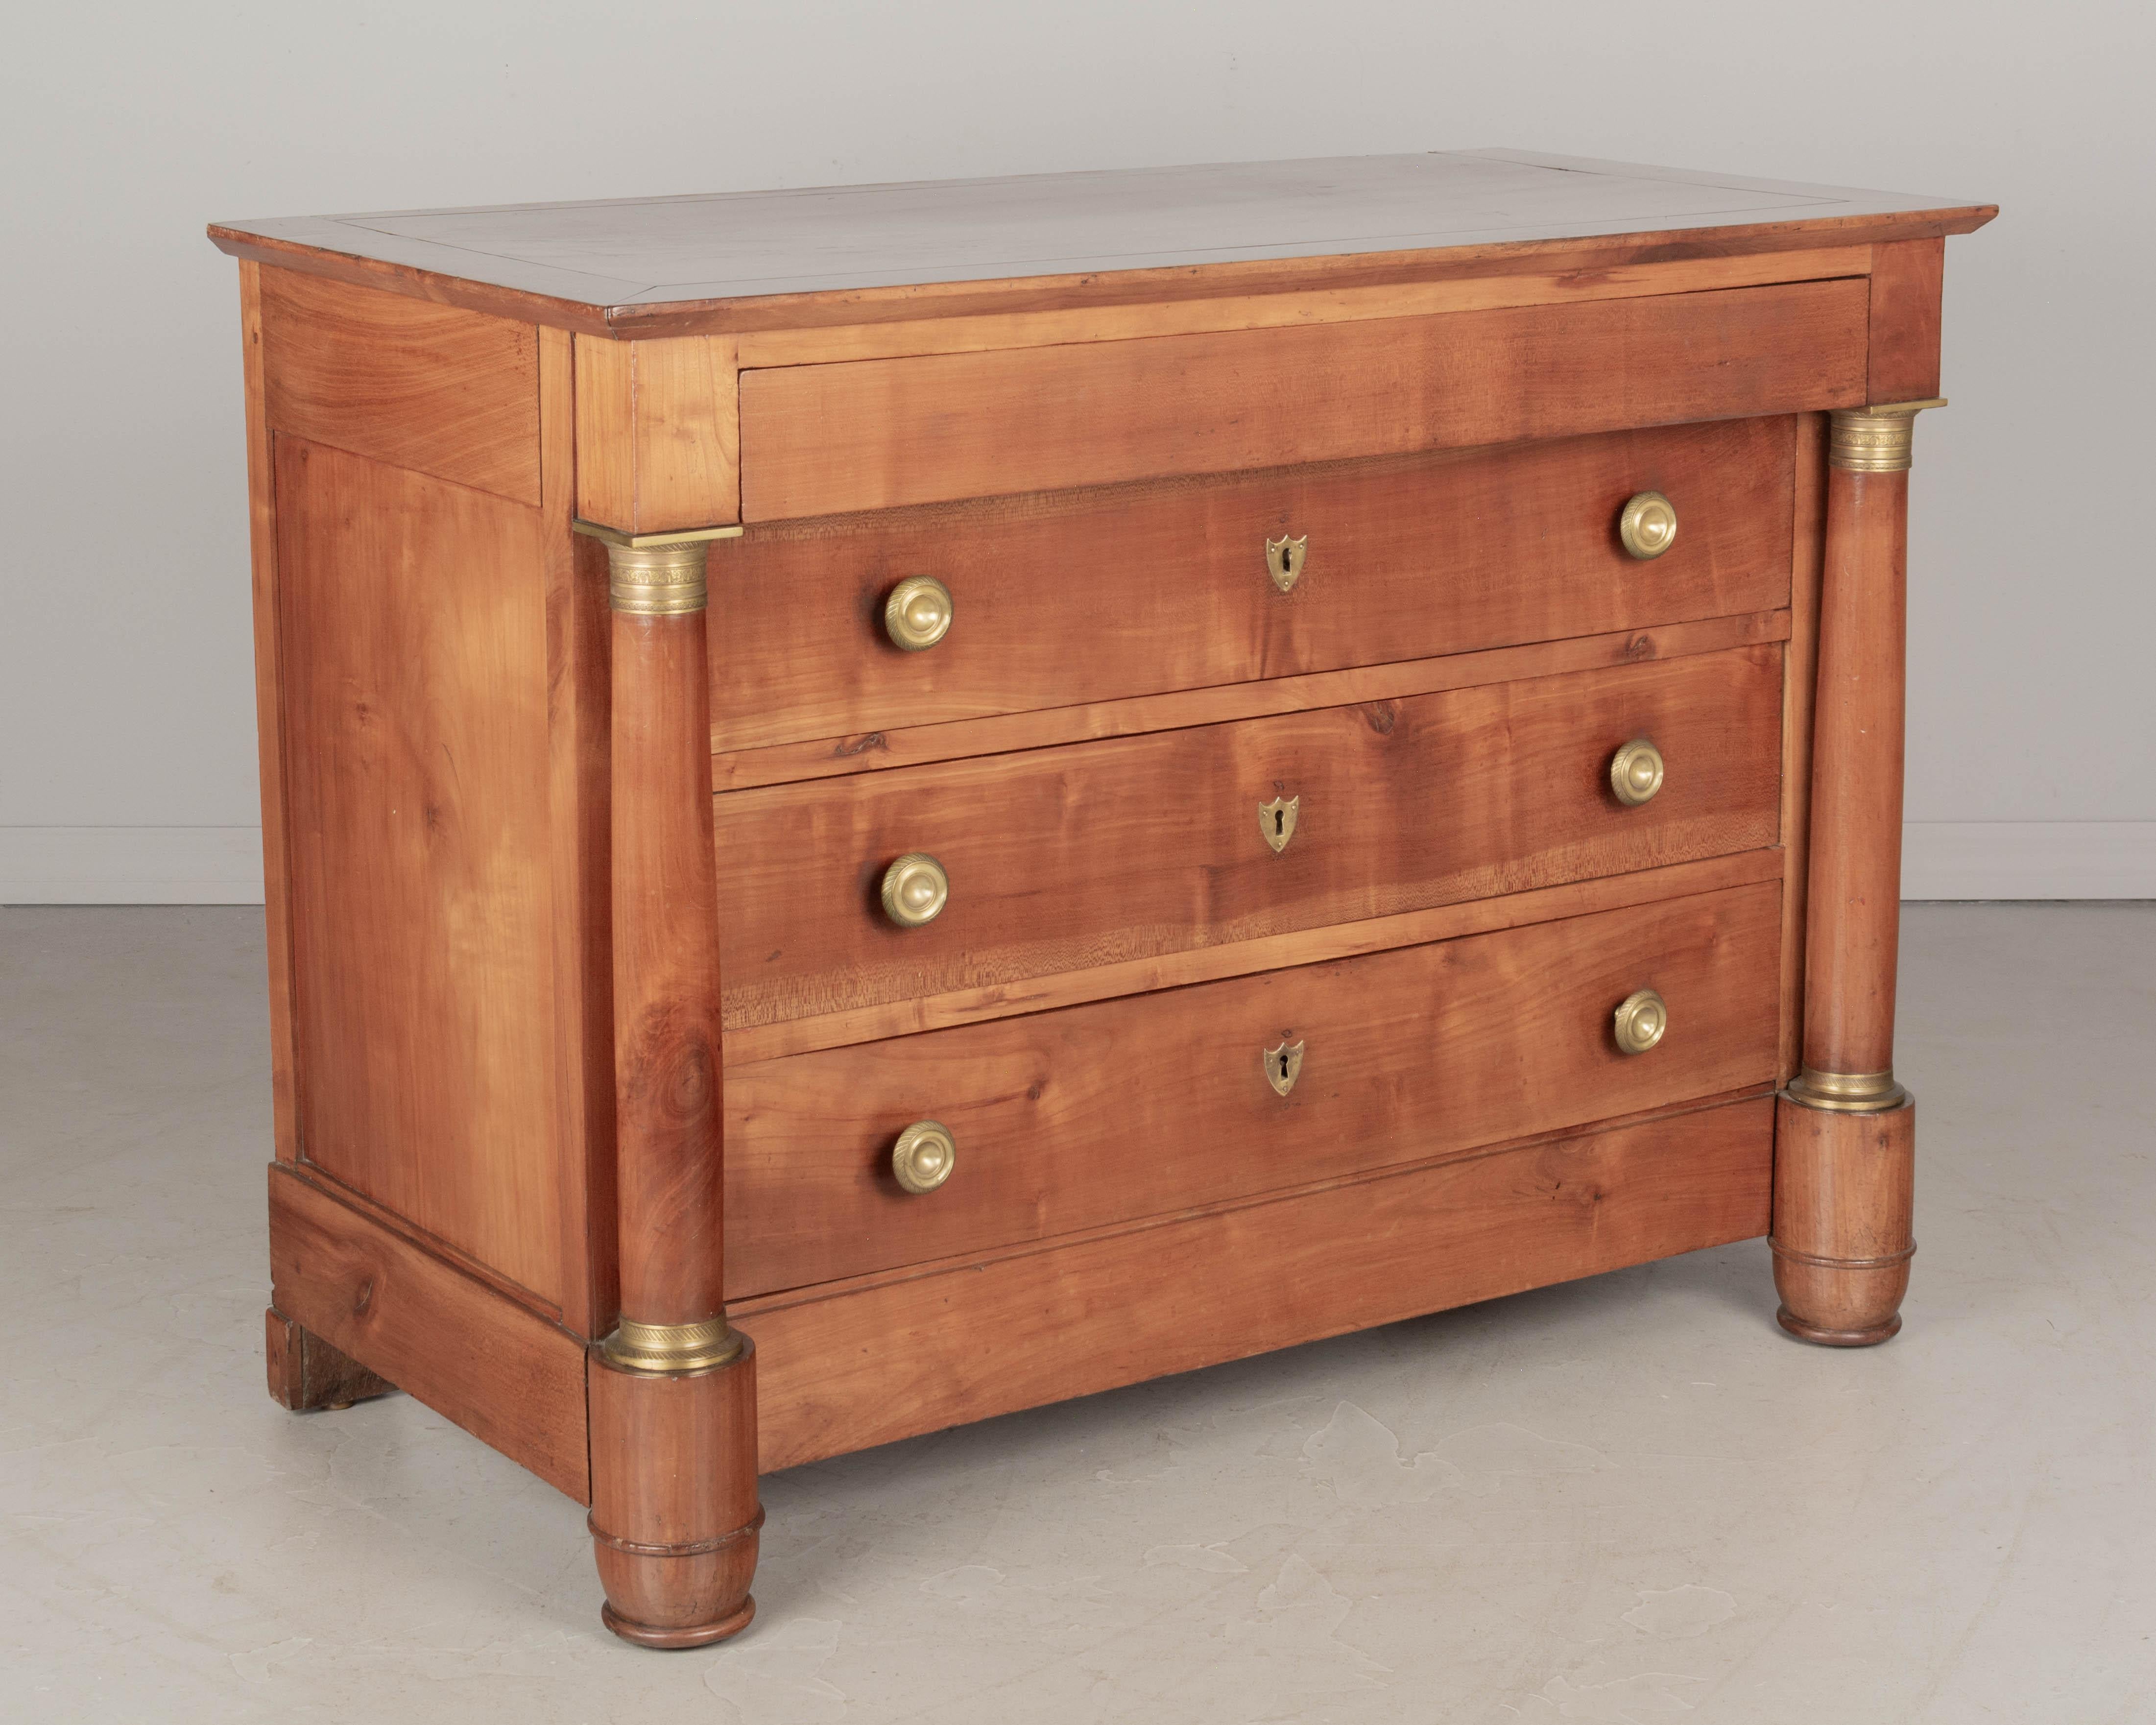 A 19th Century French Empire Period commode from Normandy made of solid cherry wood. Three dovetailed drawers with brass knobs and one hidden top drawer. Large brass mounted turned columns. Exceptional craftsmanship using mortise and tenon add